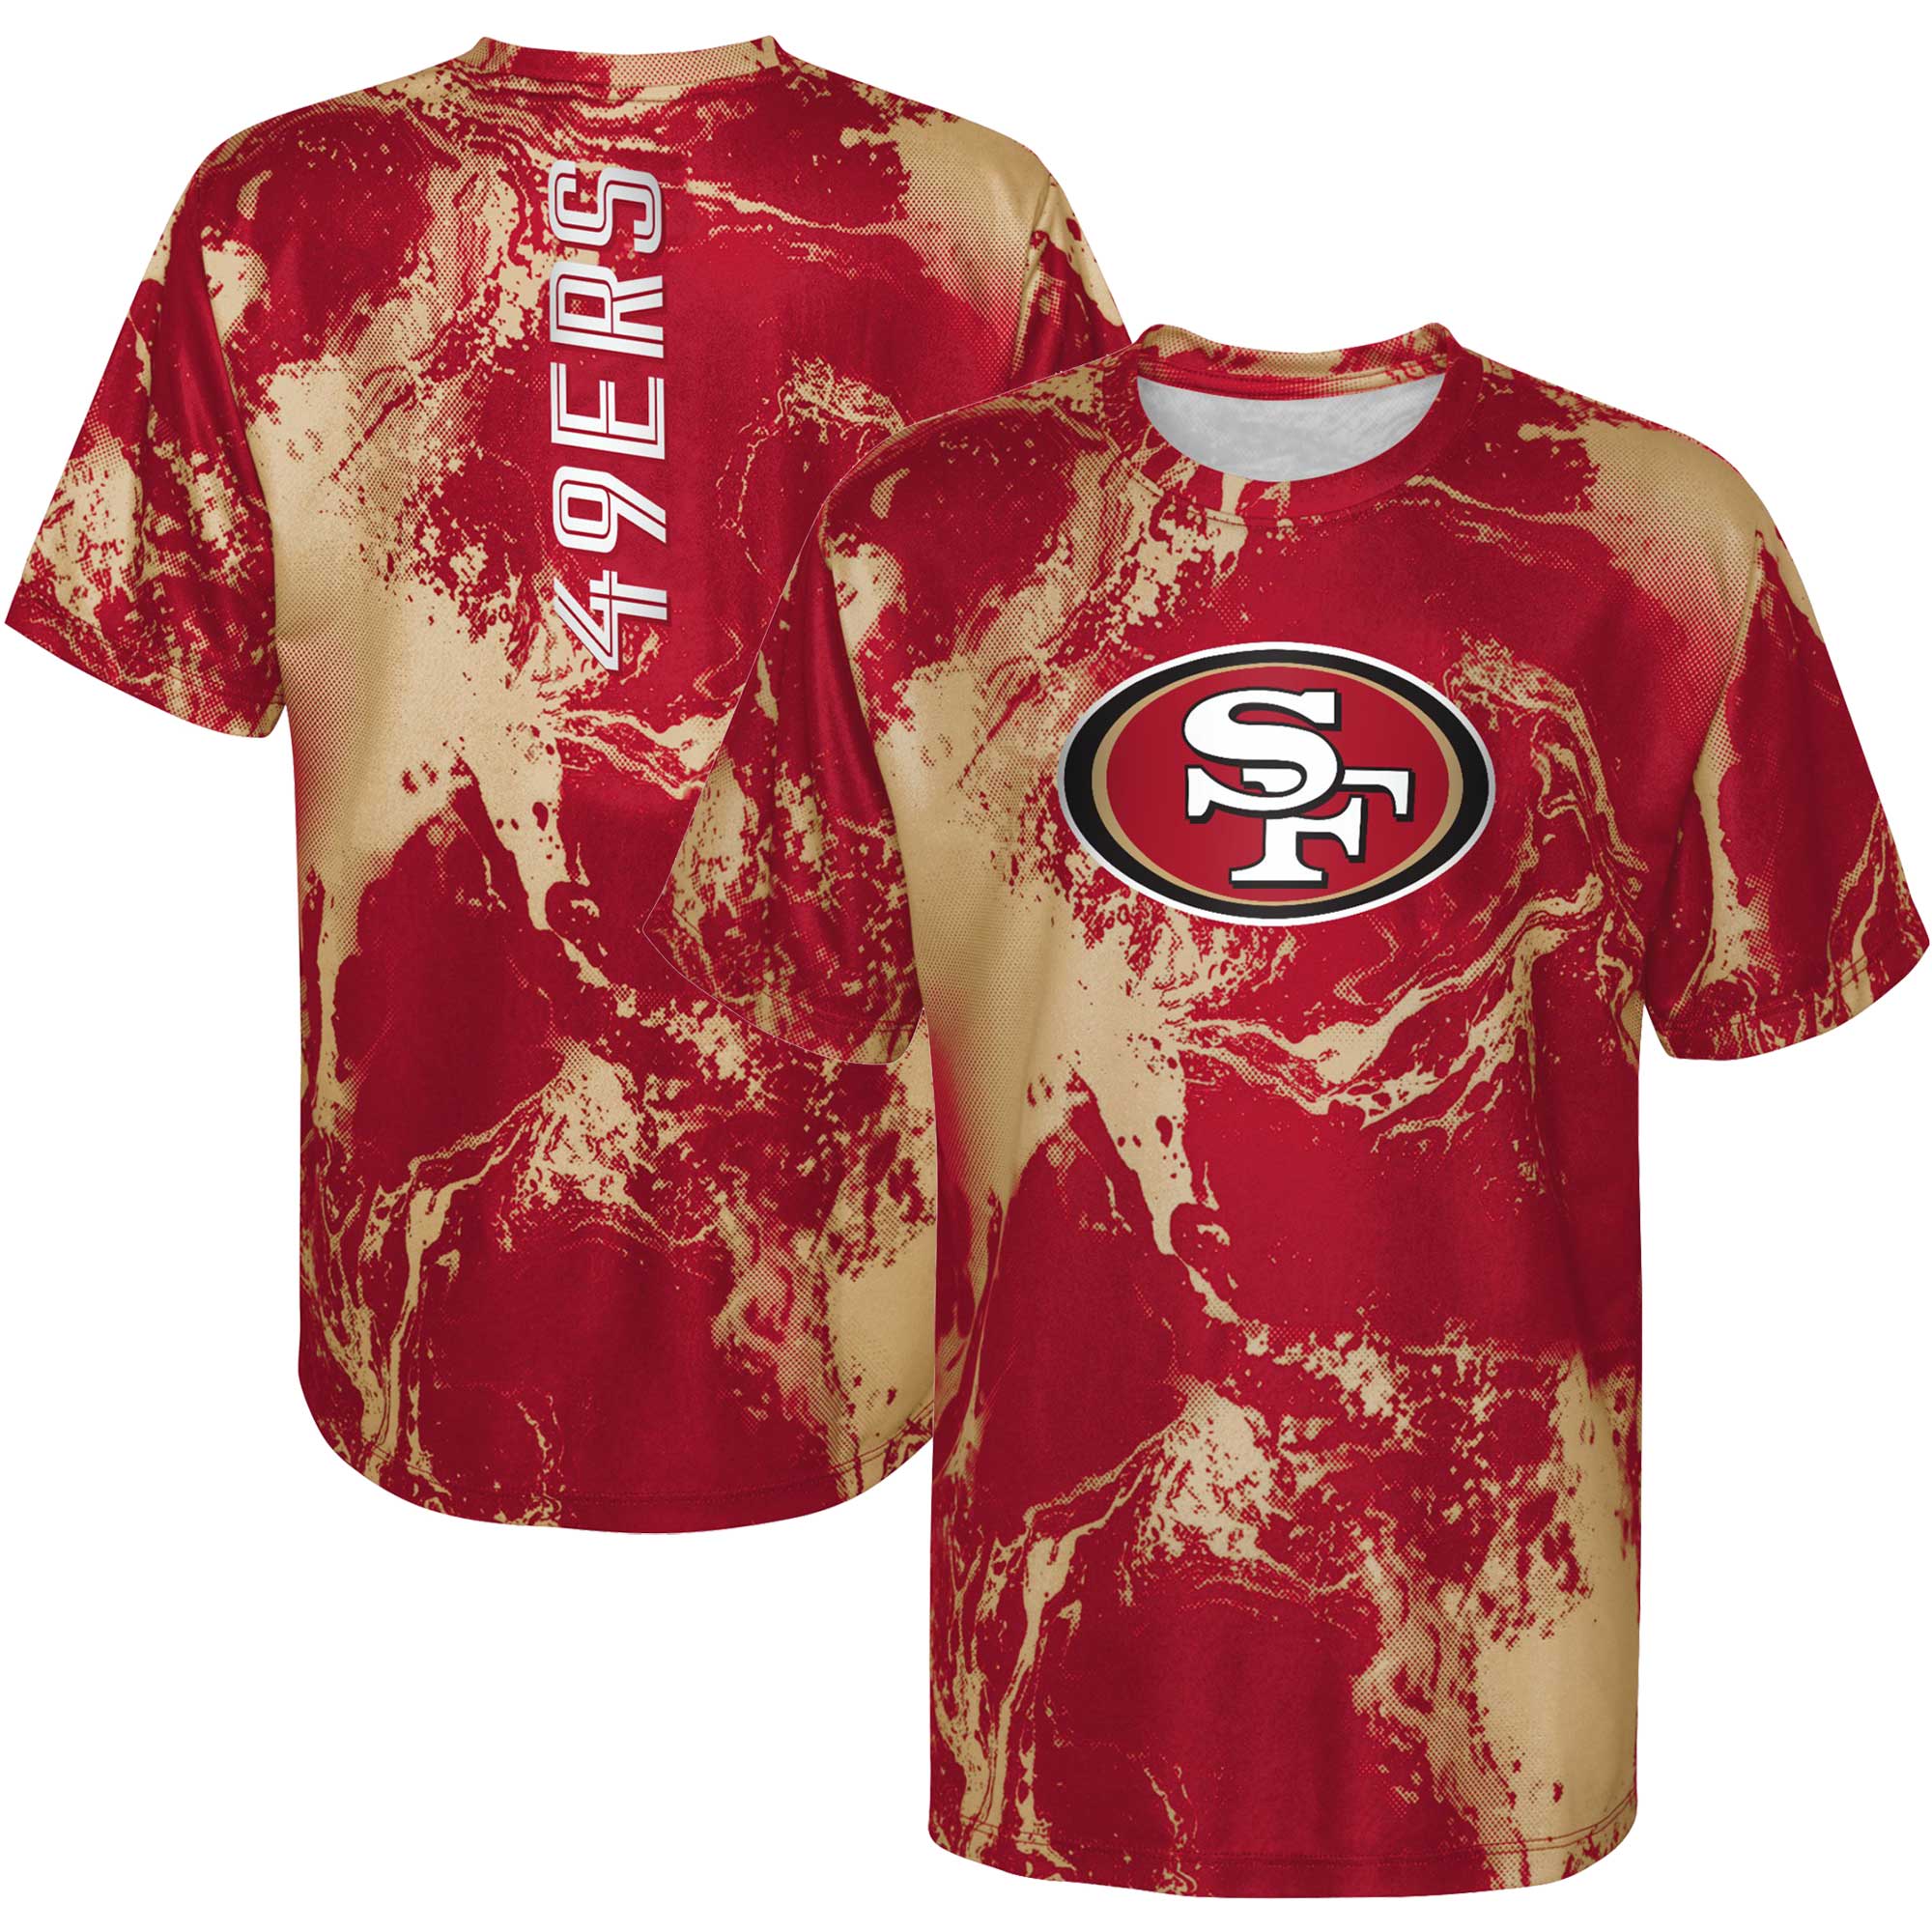 Outerstuff 49ers In The Mix T-Shirt